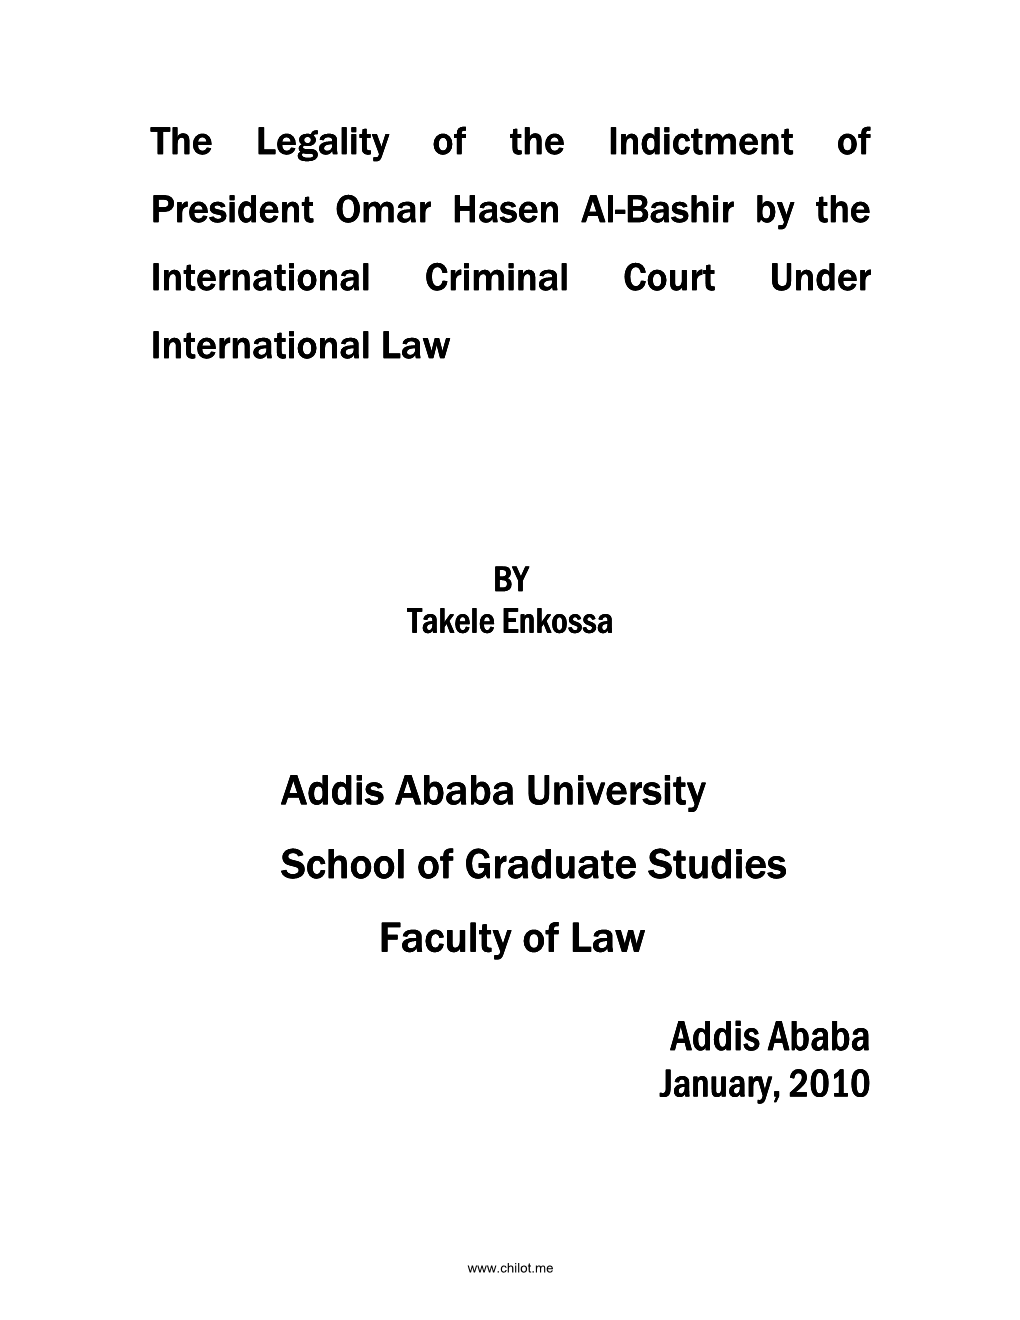 The Legality of the Indictment of President Omar Hasen Al-Bashir By